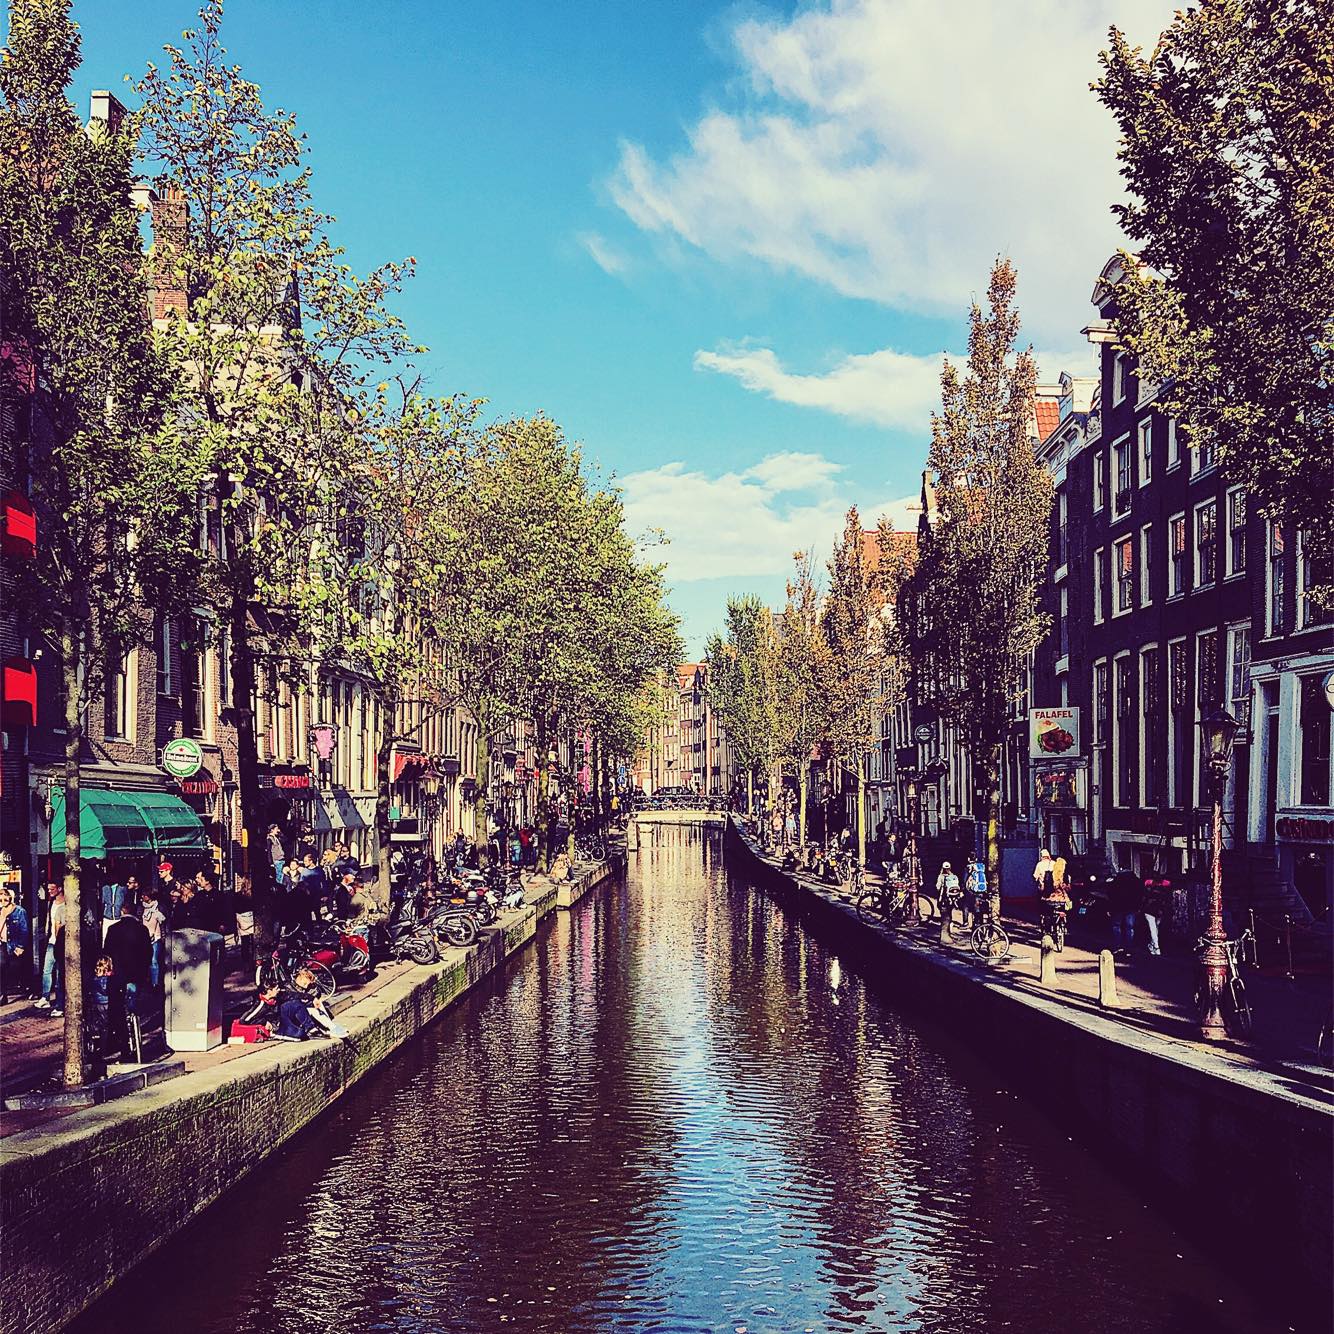 Guide to (ADE) Amsterdam Dance Event | The Nitty Gritty Guide To 